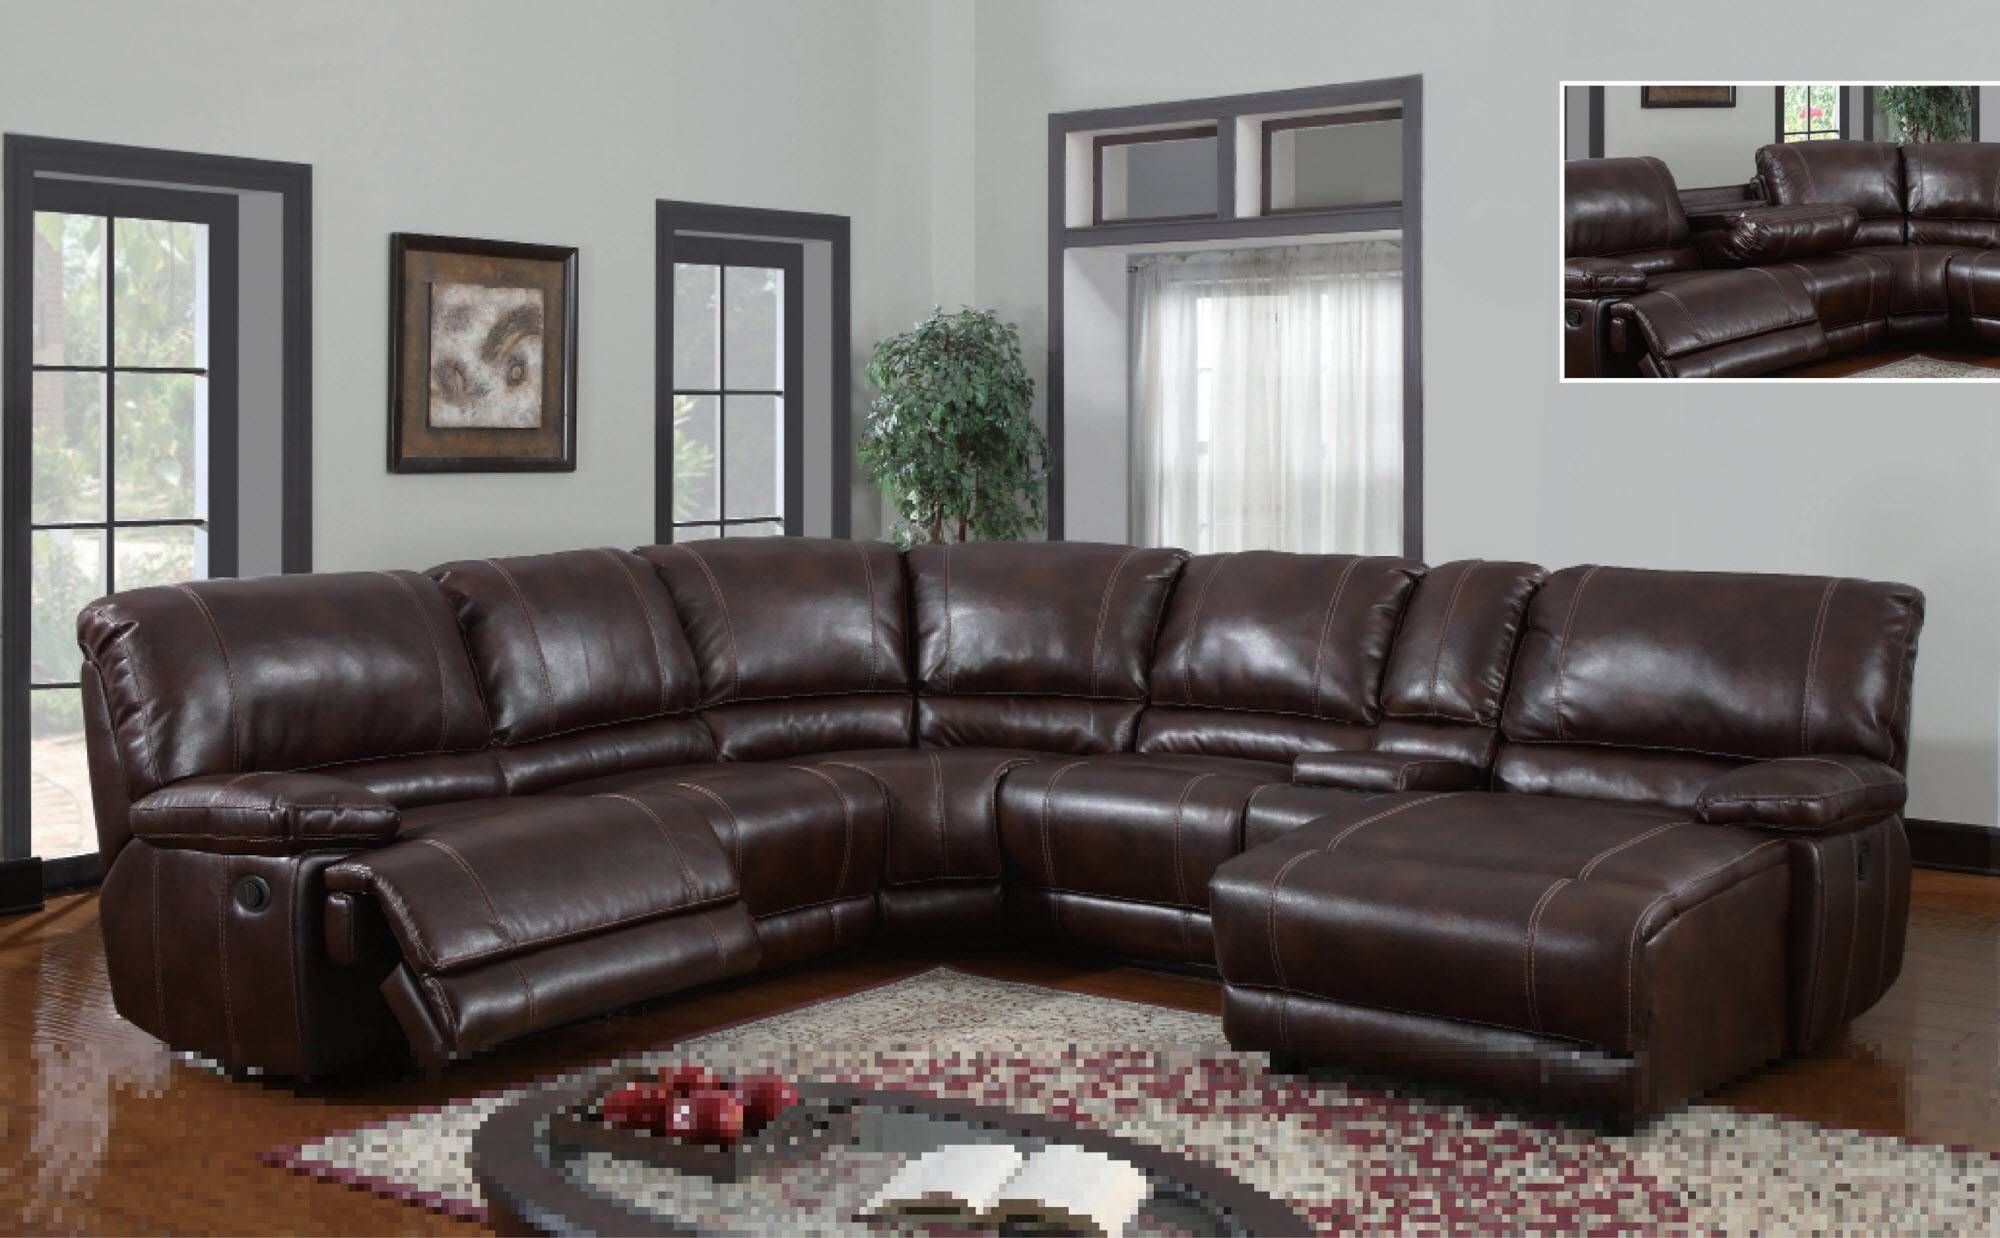 Outstanding Sectional Sofa With Chaise Lounge And Recliner 99 For With The Brick Leather Sofa (View 21 of 30)